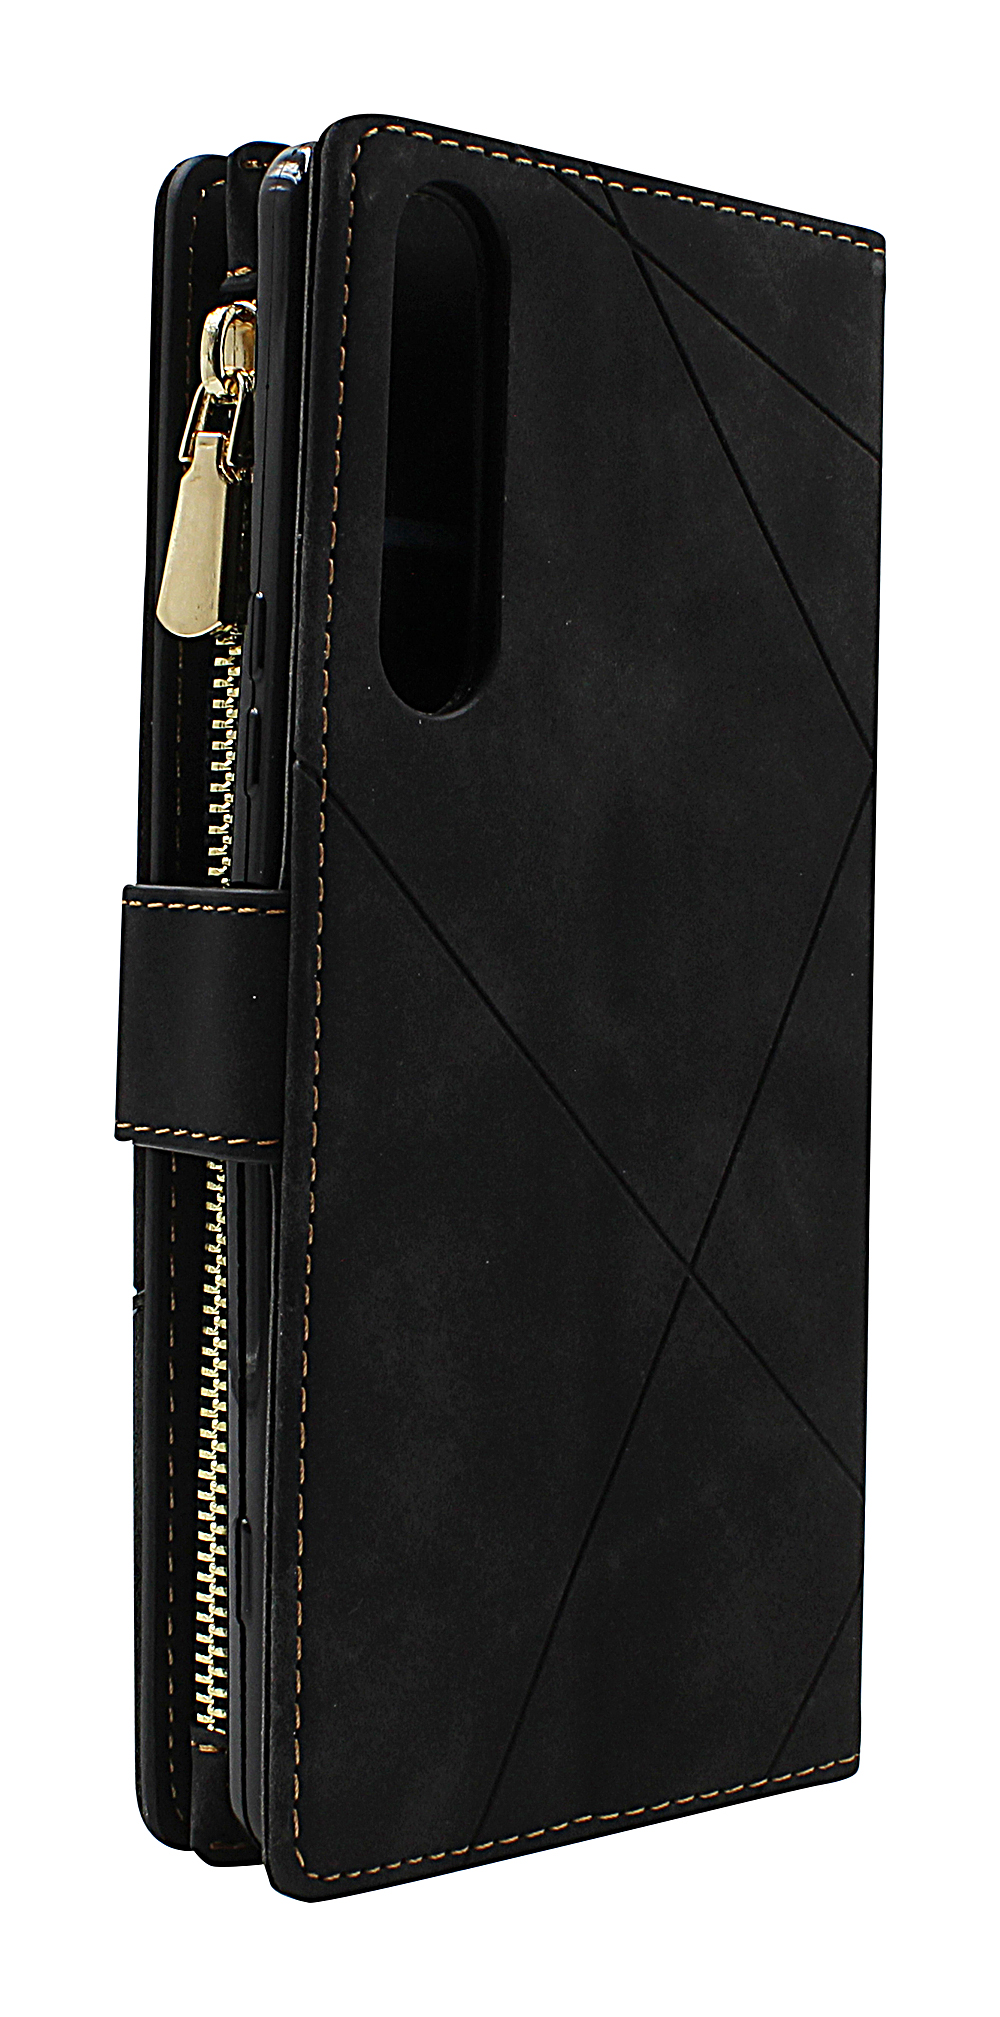 XL Standcase Luxwallet Sony Xperia 1 II (XQ-AT51 / XQ-AT52)